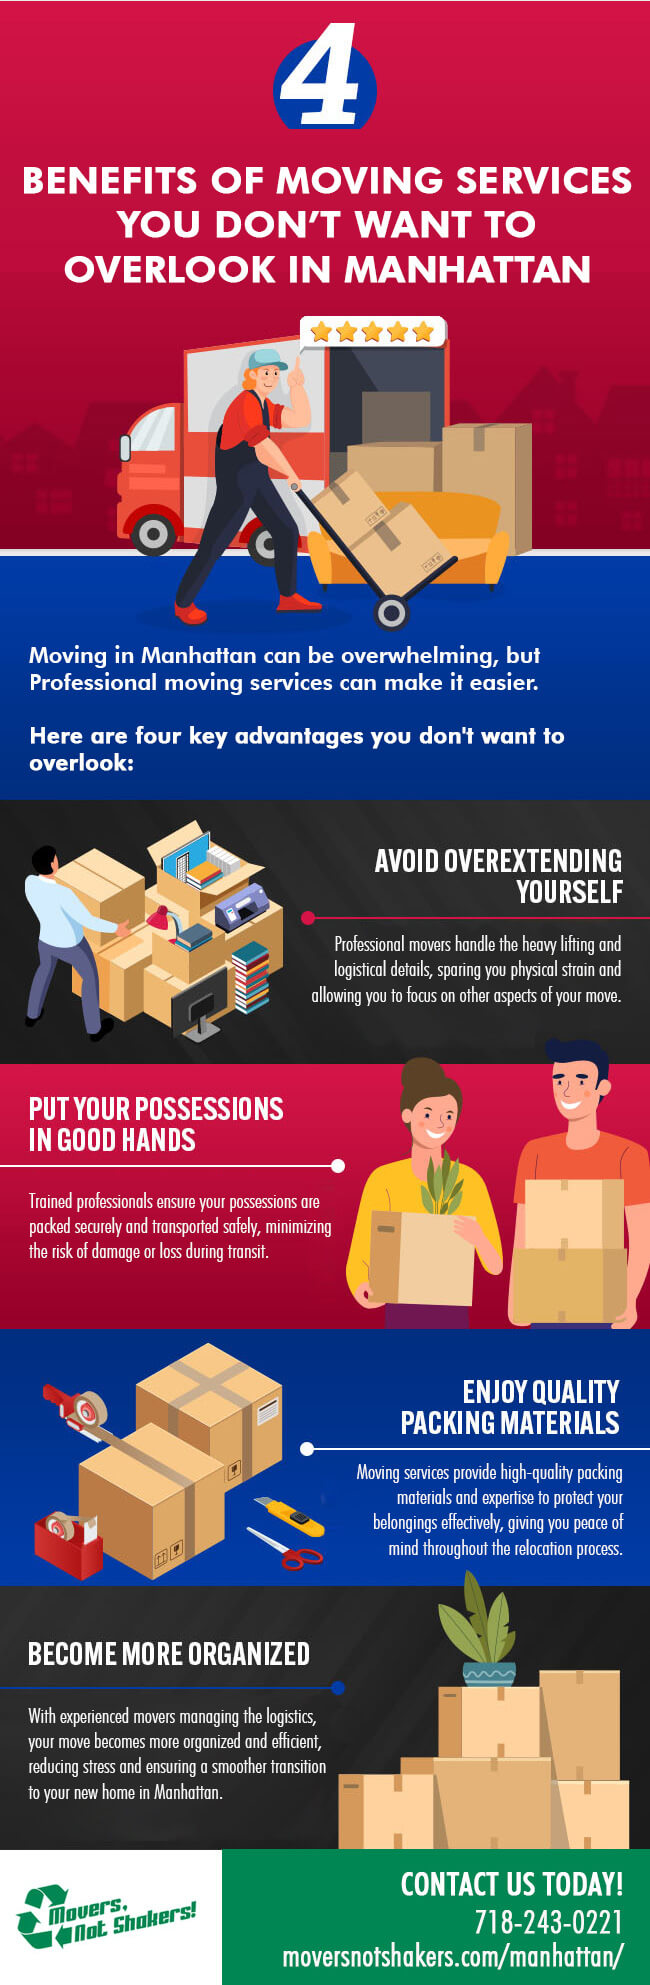 4 Benefits of Moving Services You Don’t Want to Overlook in Manhattan